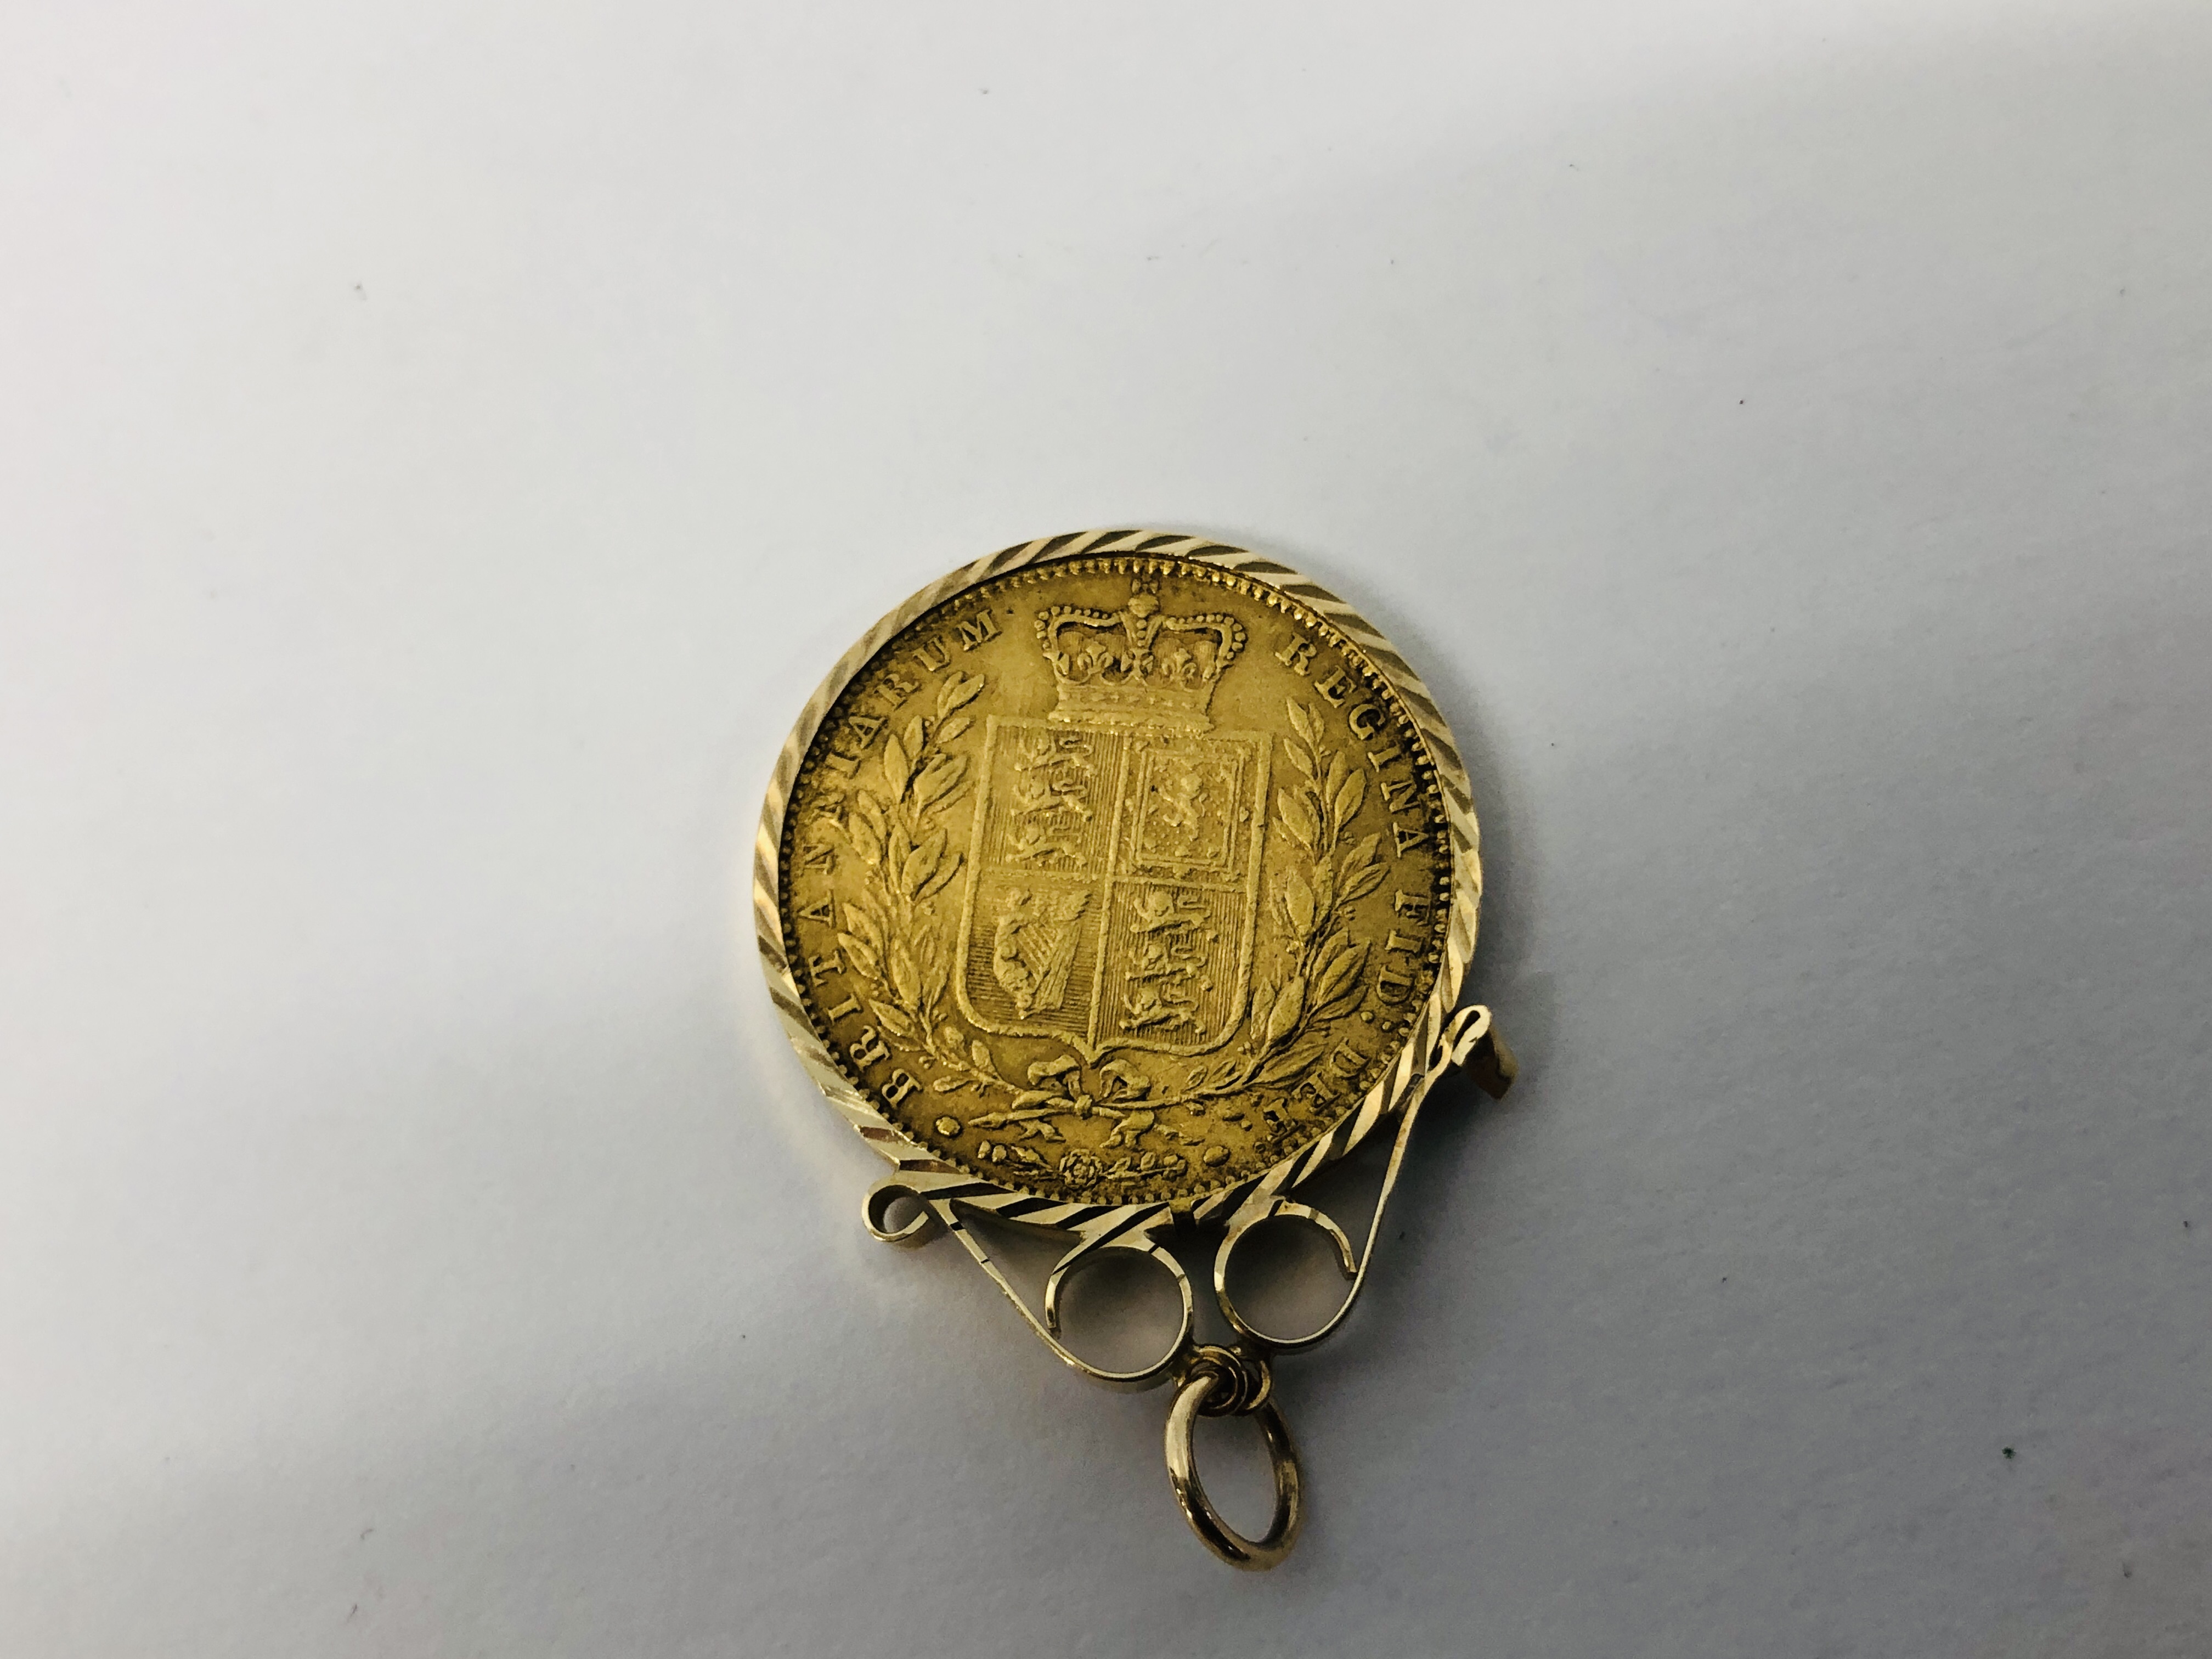 1855 GOLD SOVEREIGN - VICTORIA YOUNG HEAD, SHIELD BACK LONDON IN 9CT GOLD PENDANT MOUNT. - Image 3 of 5